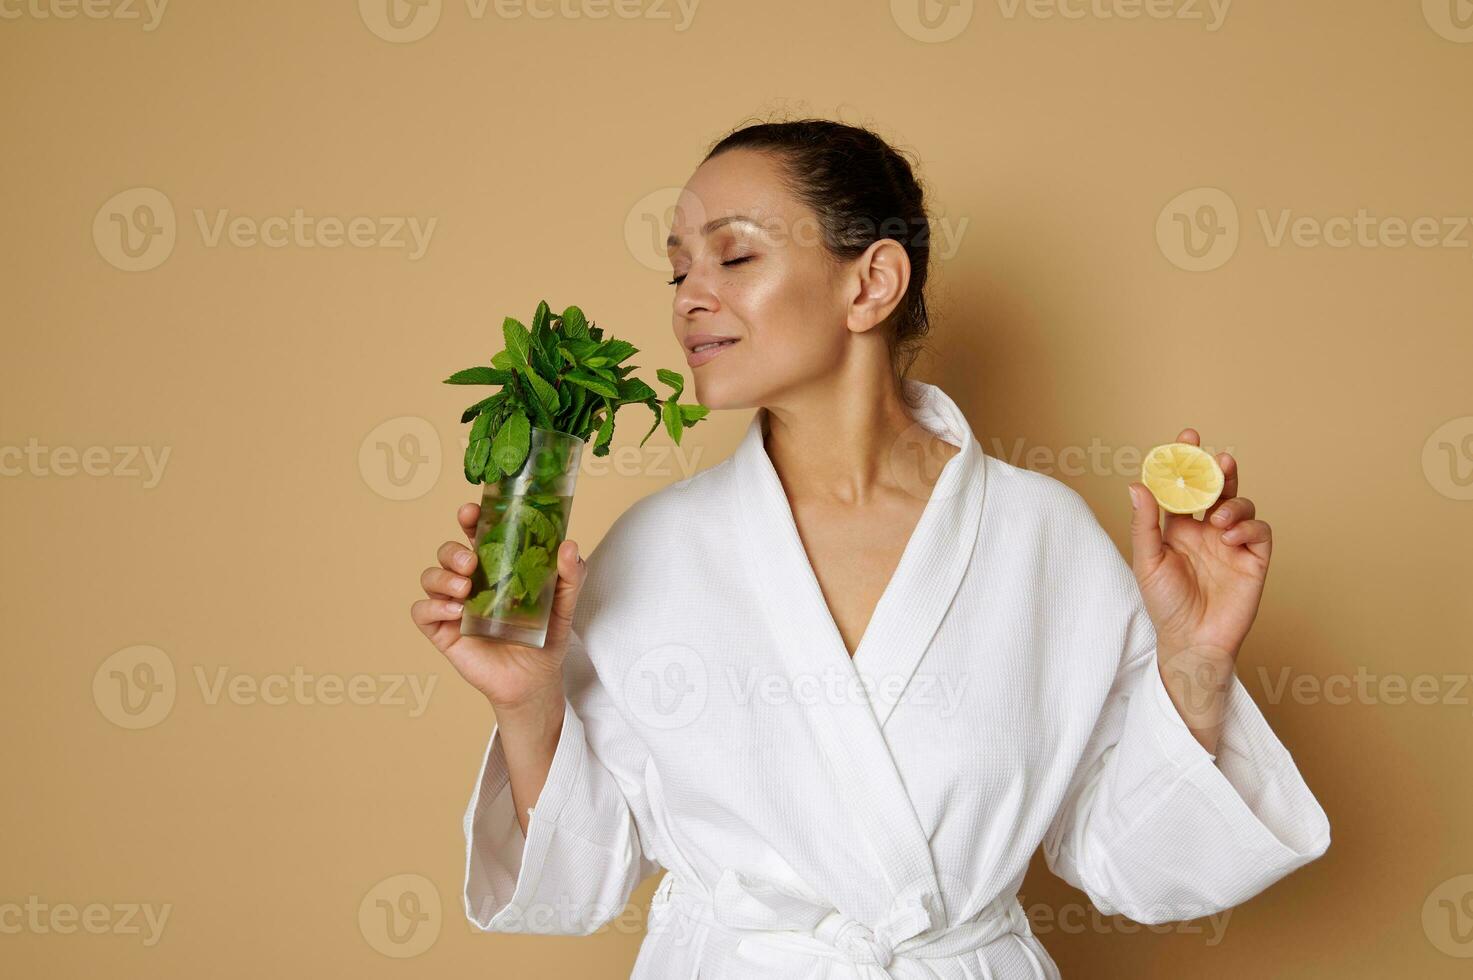 Isolated portrait on beige background of a young beautiful woman with clean skin holding a half lemon in one hand and enjoying the scent of mint in the other hand. photo